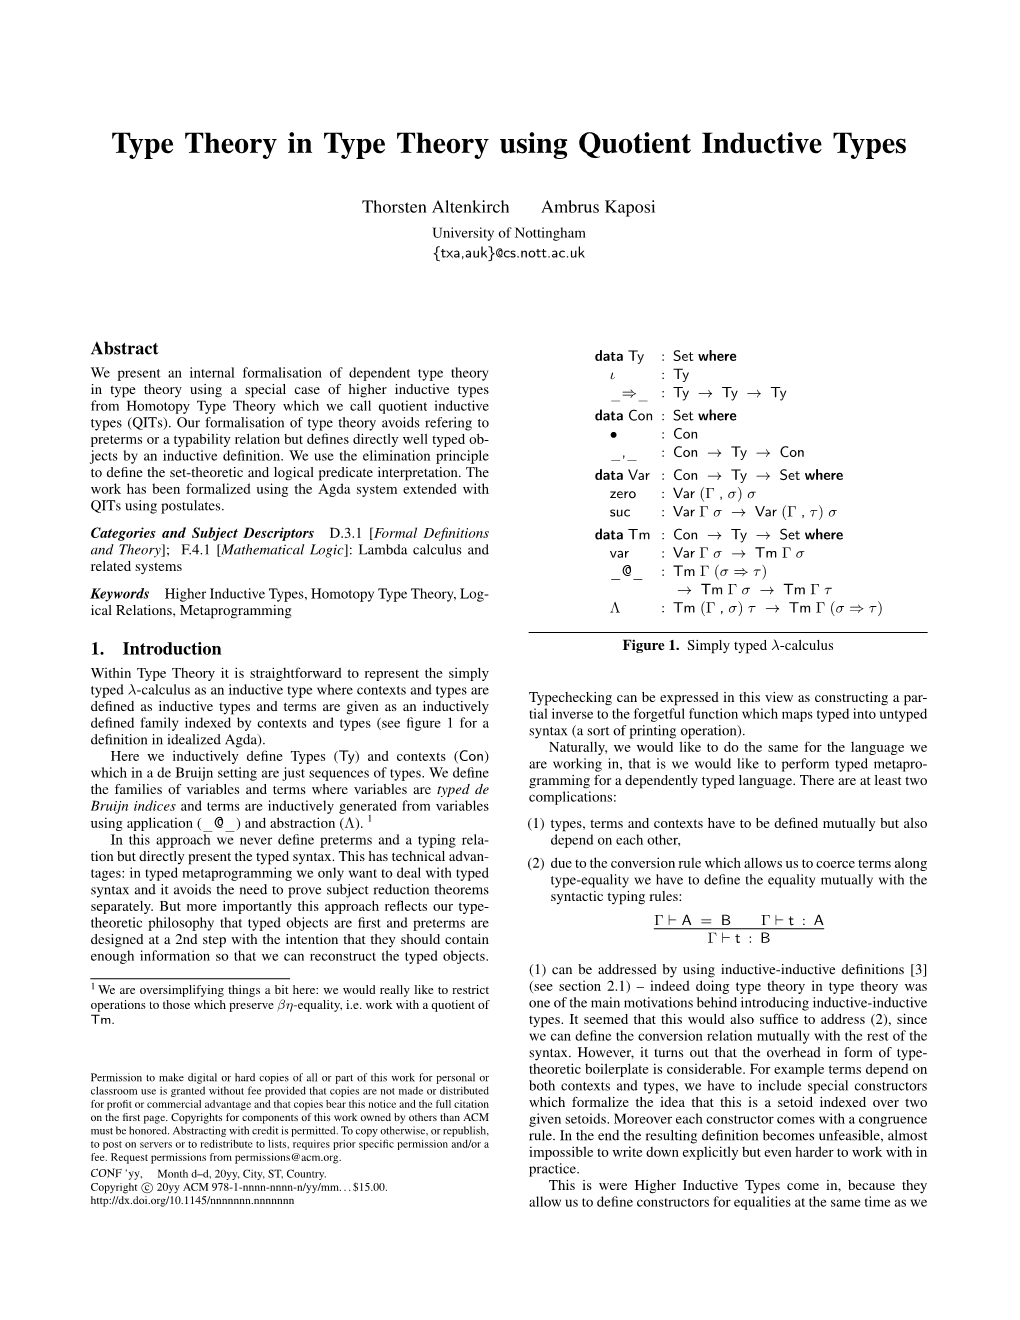 Type Theory in Type Theory Using Quotient Inductive Types